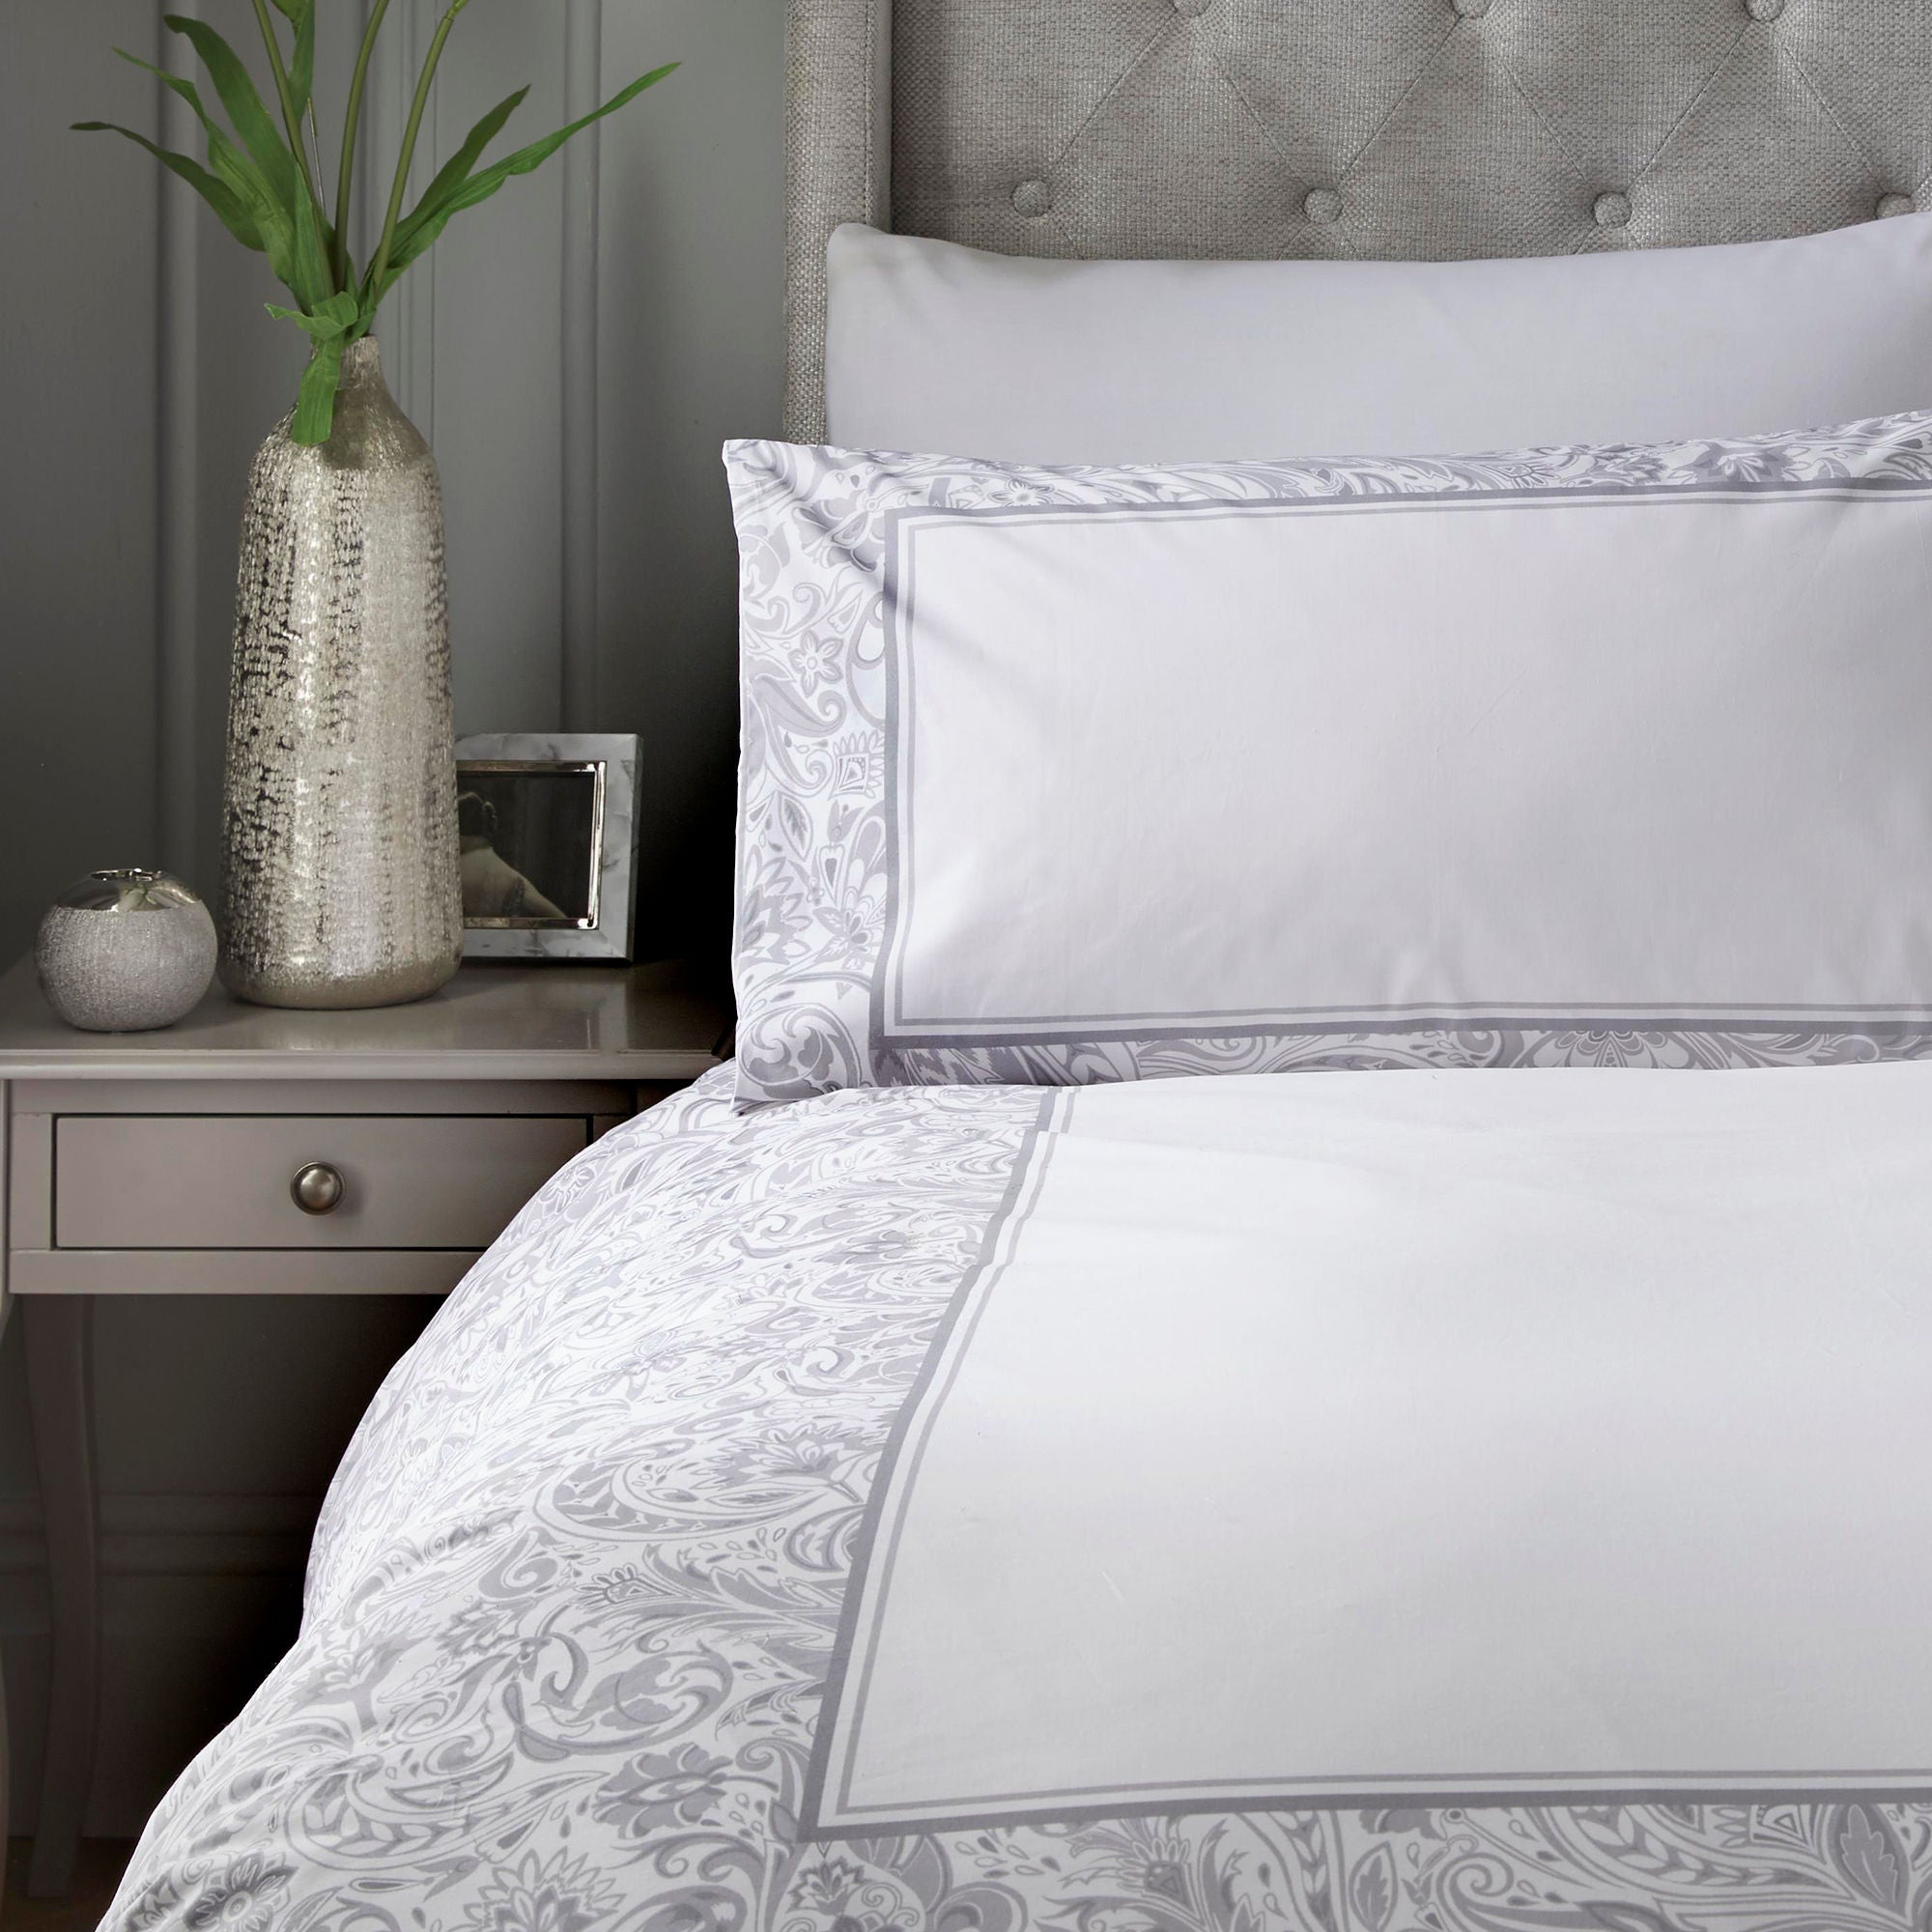 Suzani Duvet Cover Set by Laurence Llewelyn-Bowen in Grey - Duvet Cover Set - Laurence Llewelyn-Bowen